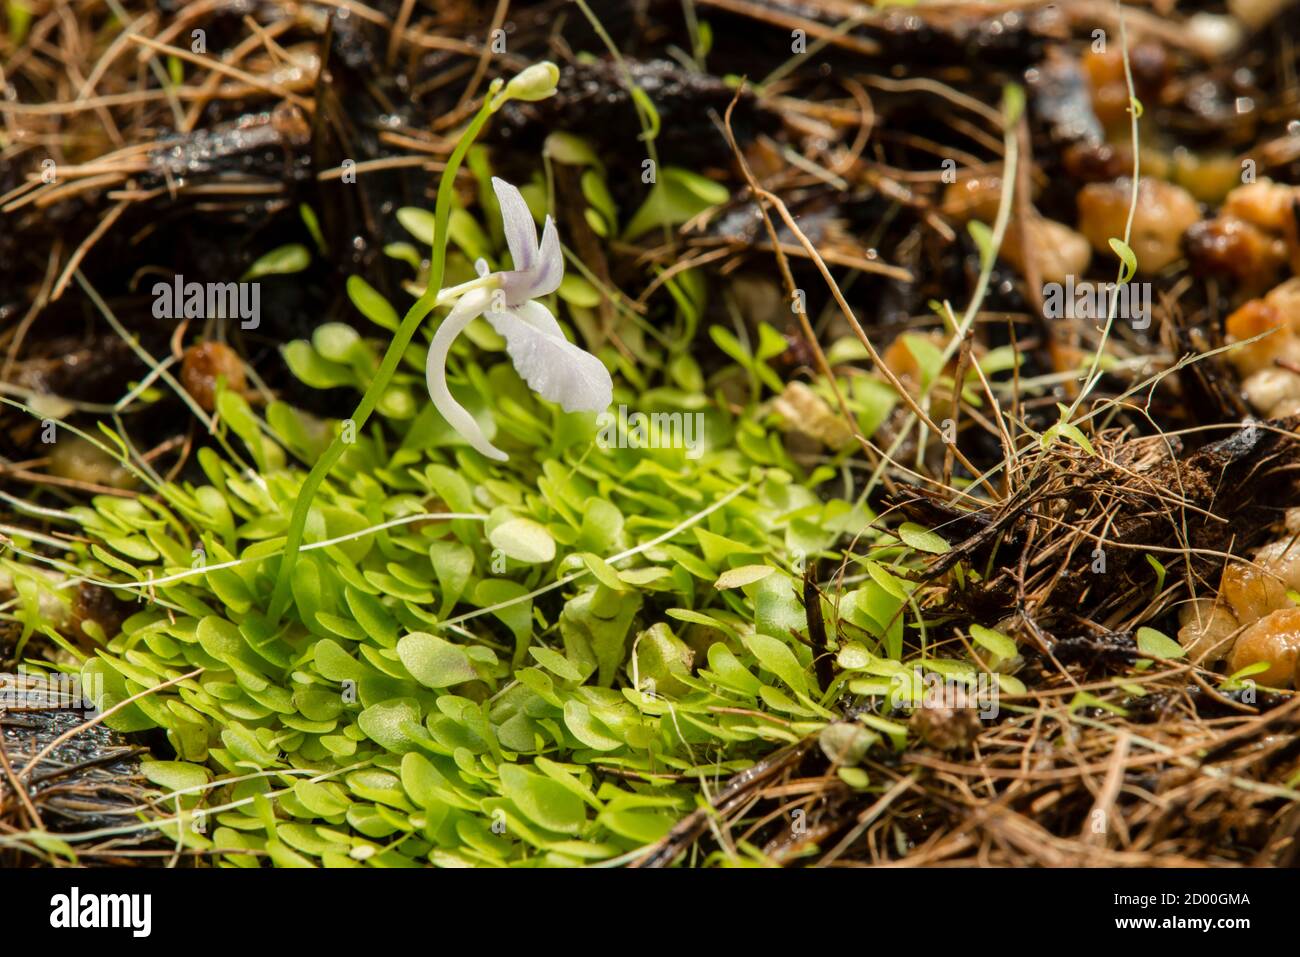 Plants and flowers of Utricularia sandersonii, small perennial carnivorous plant, endemic to South Africa Stock Photo